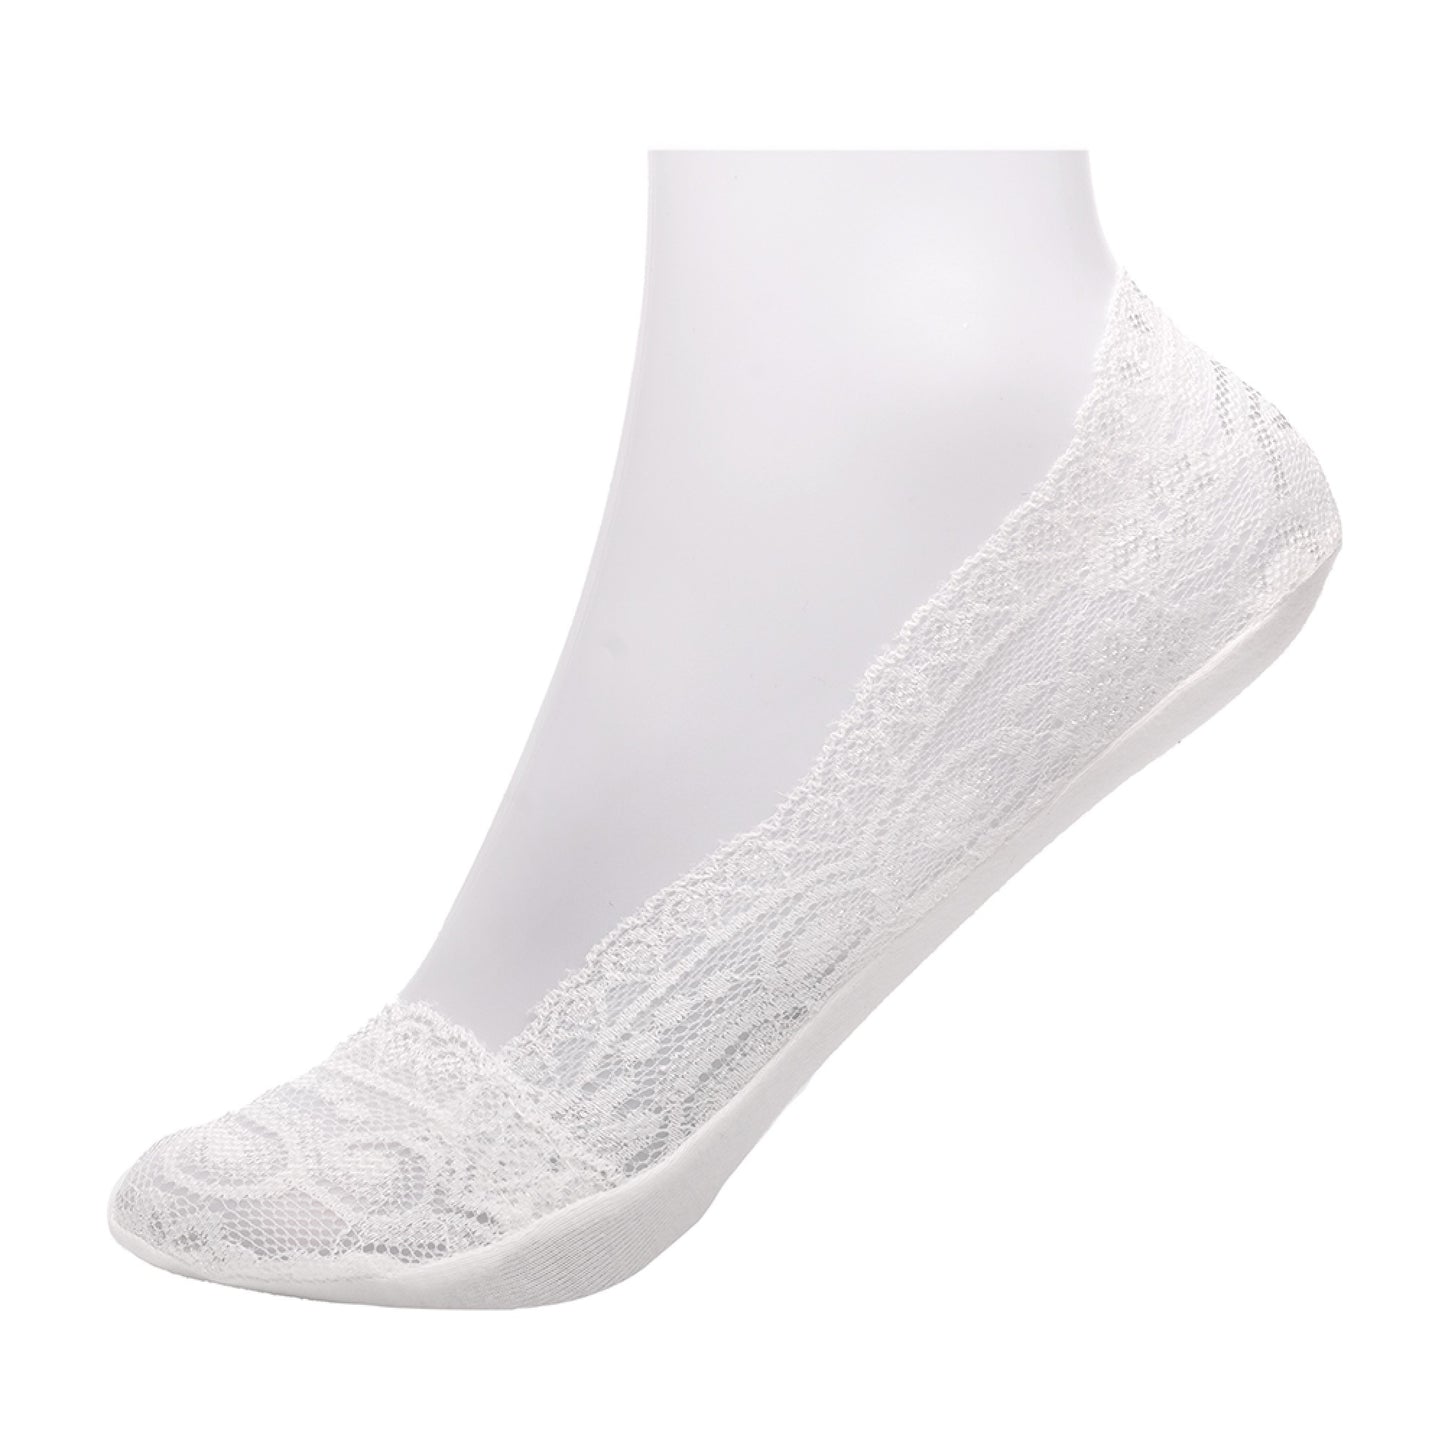 4 Pairs Ladies Cotton Rich Lace No-Show Invisible Shoe Liner Socks with Silicon Support